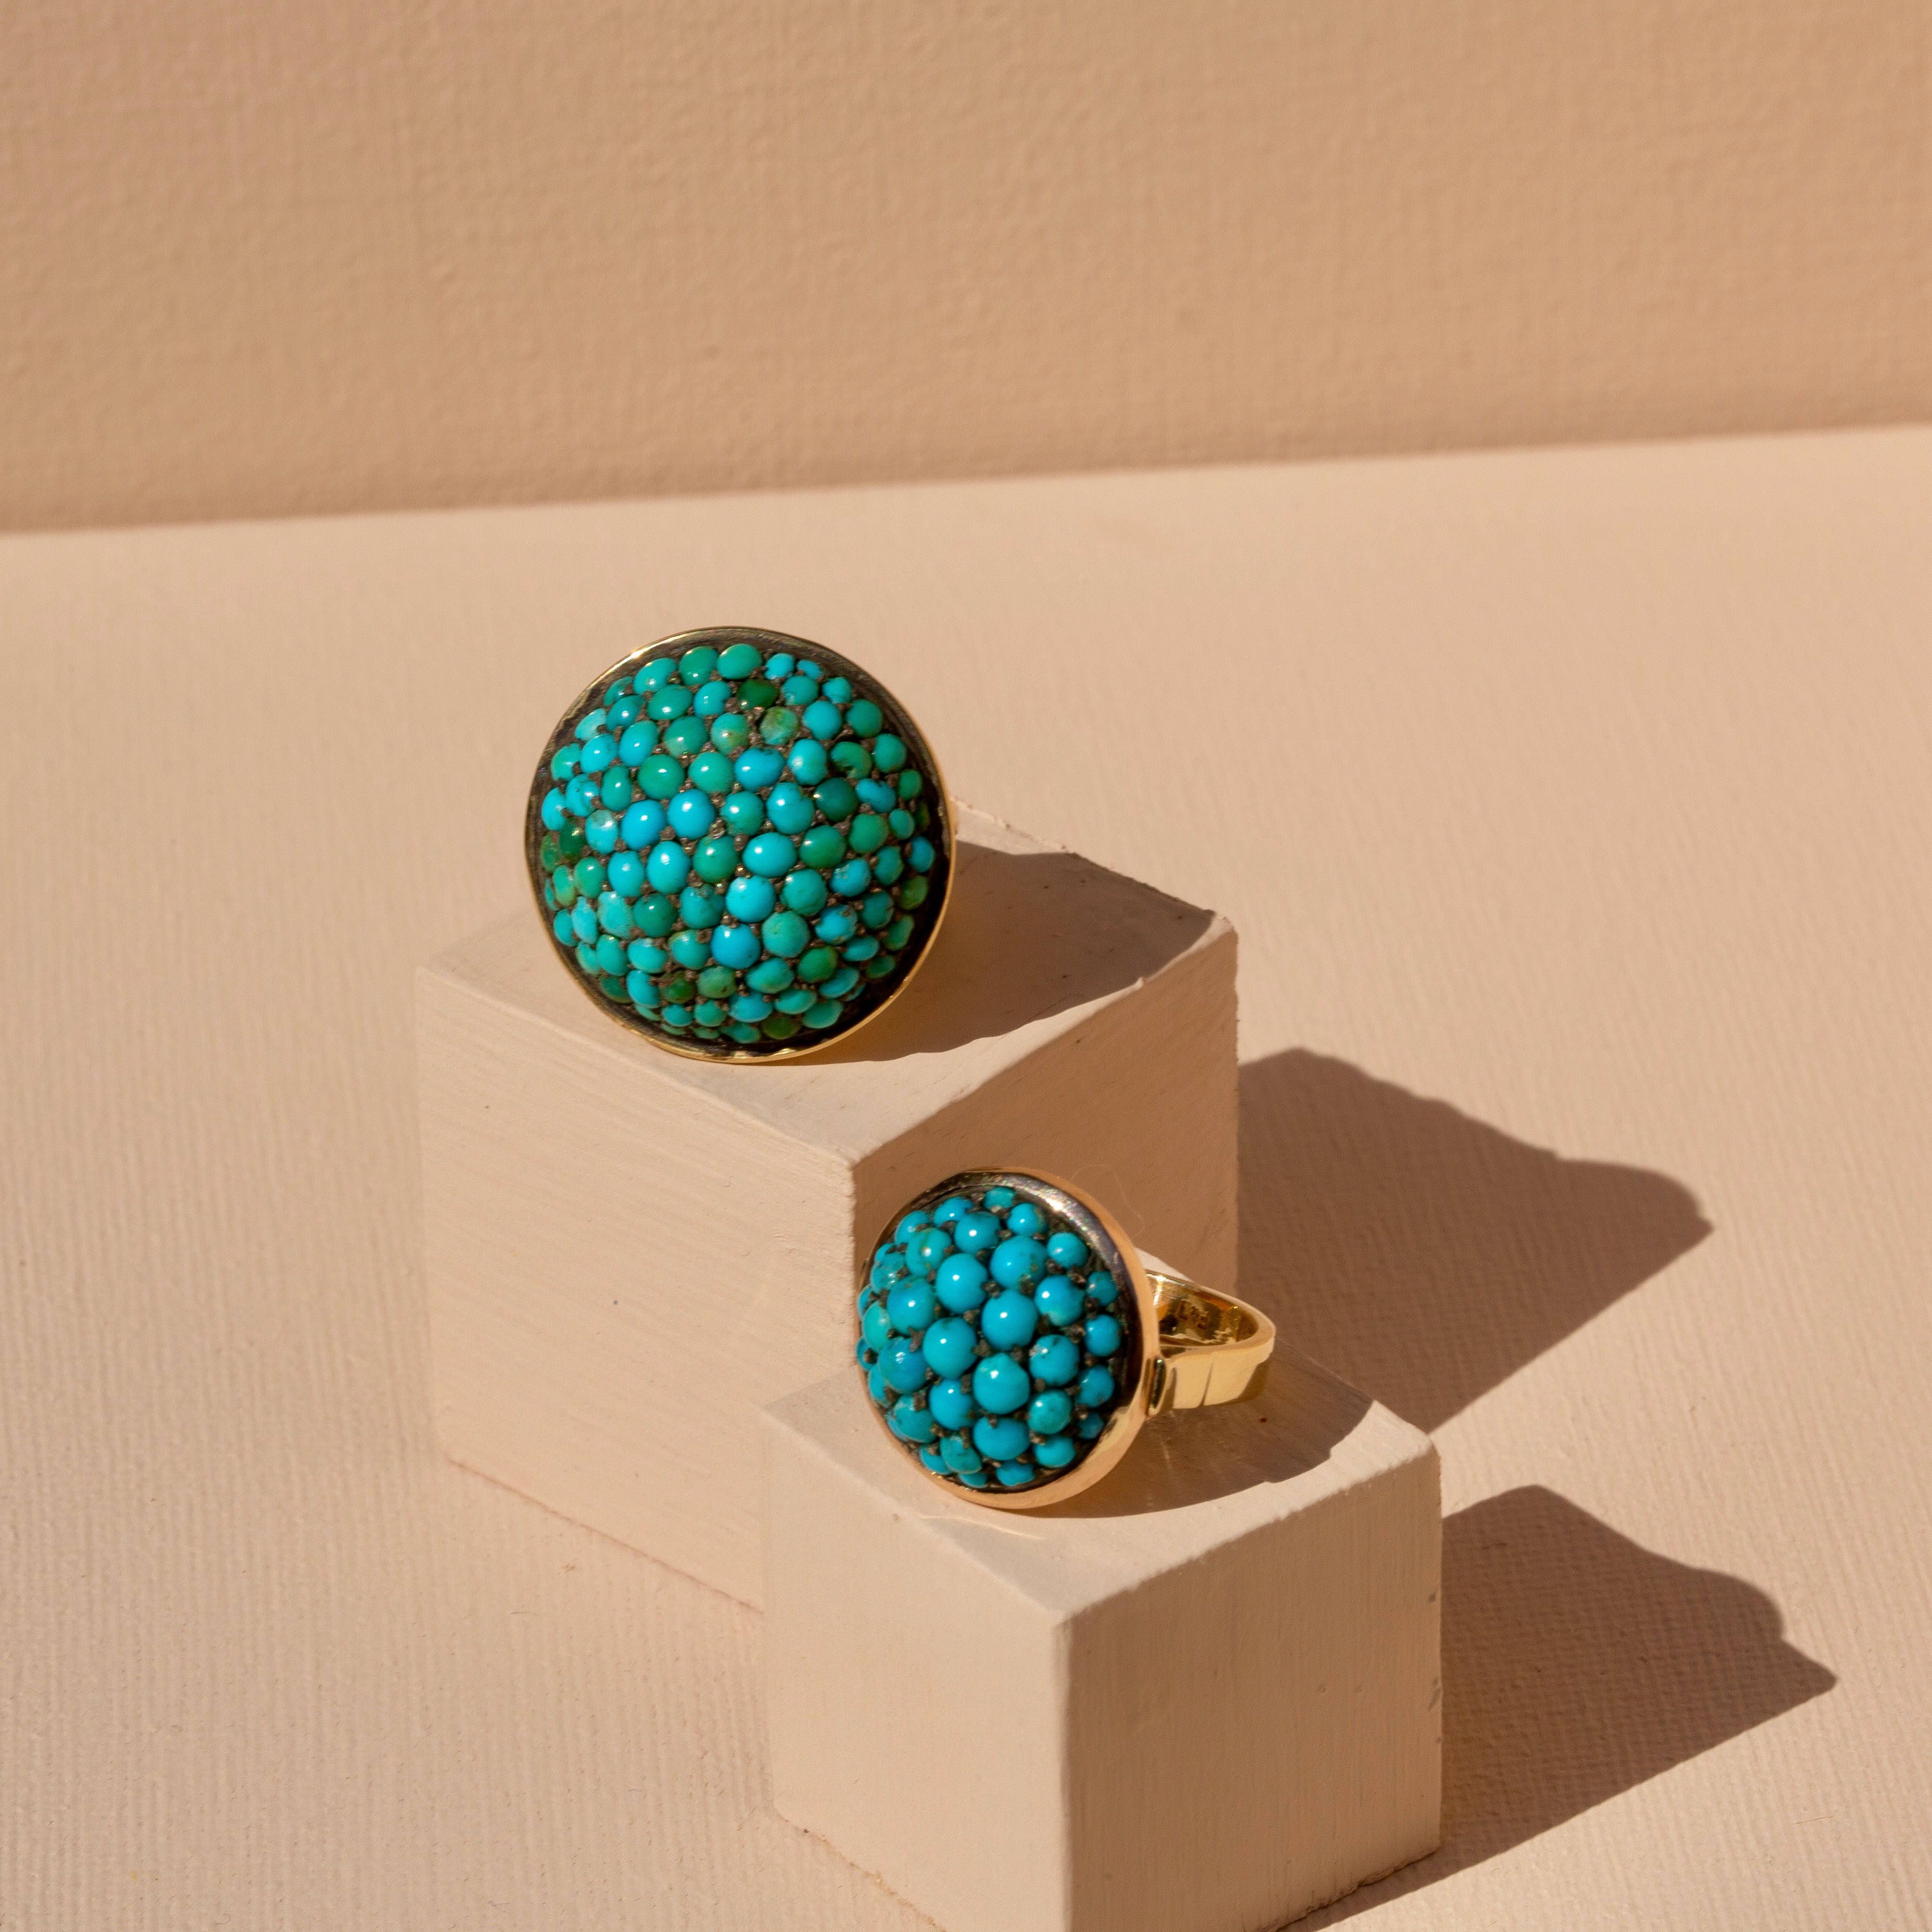 Victorian Pavé Turquoise, Silver, and 14k Gold Dome Ring